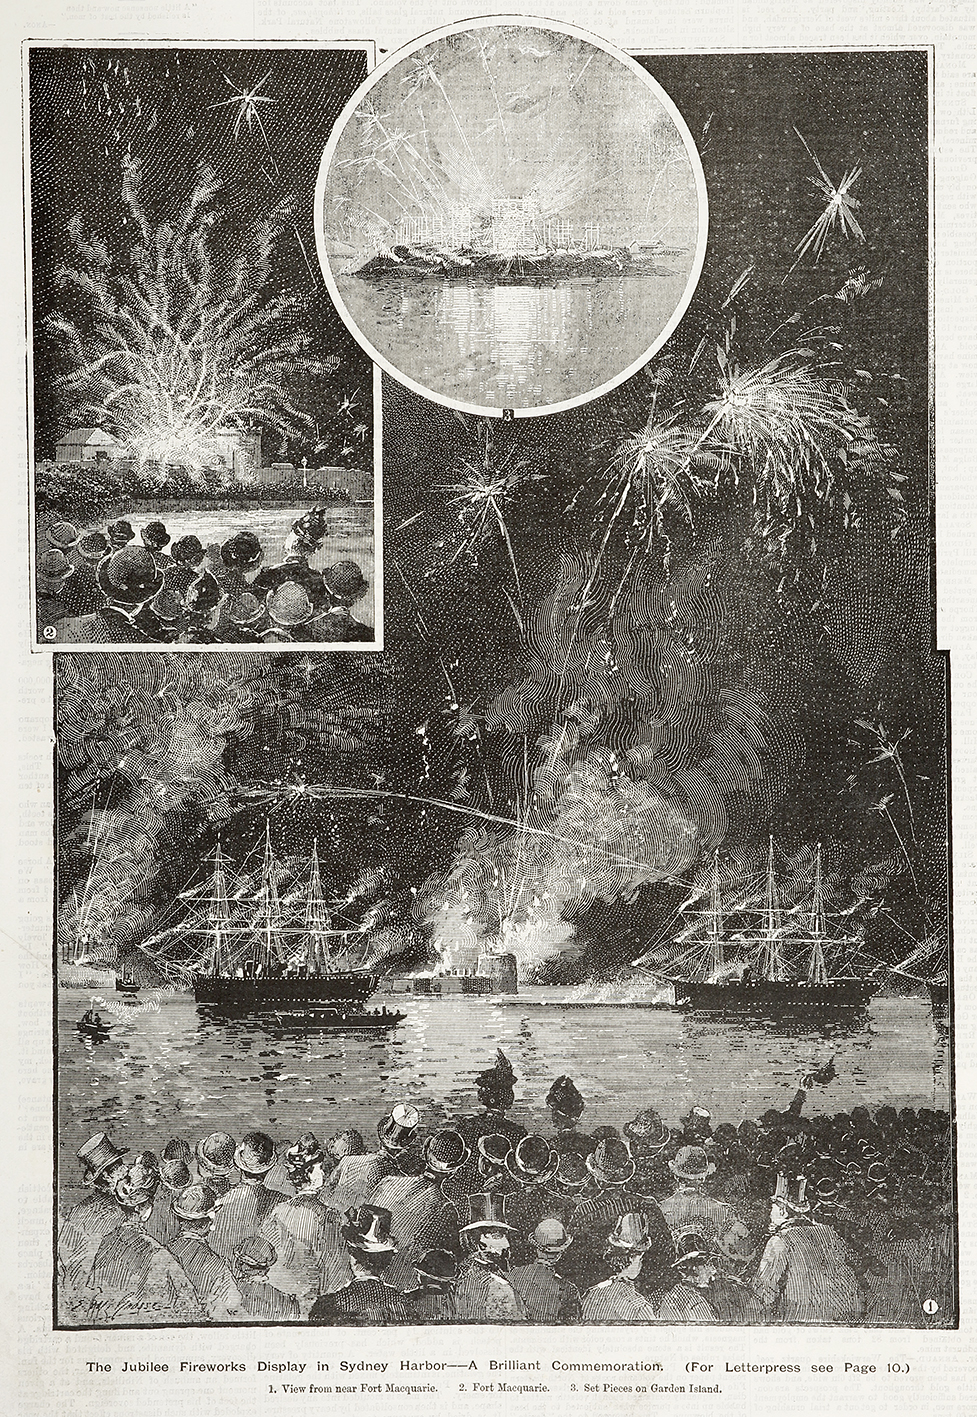 The Jubilee Fireworks display in Sydney Harbor - A Brilliant Commemoration. - Antique Print from 1887